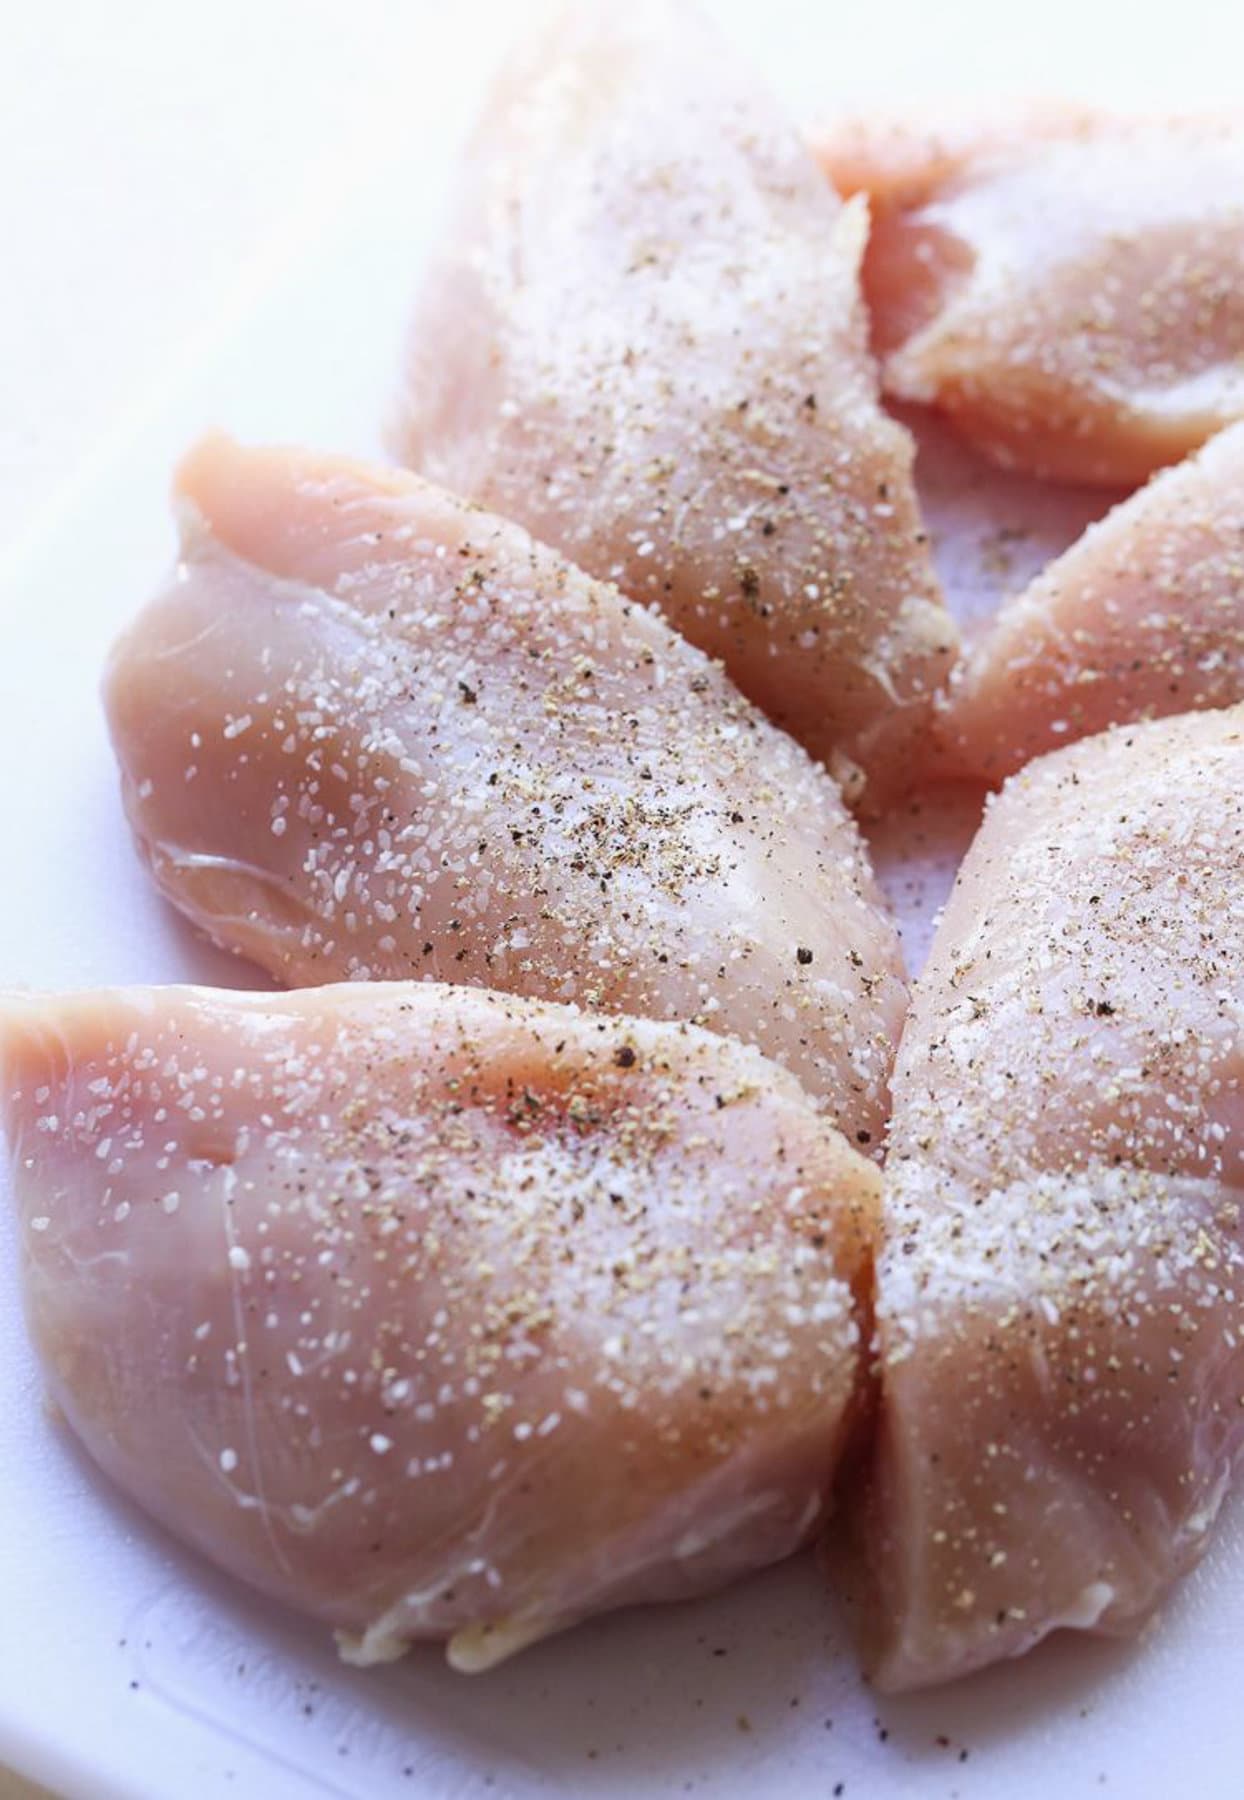 Raw chicken with salt and pepper